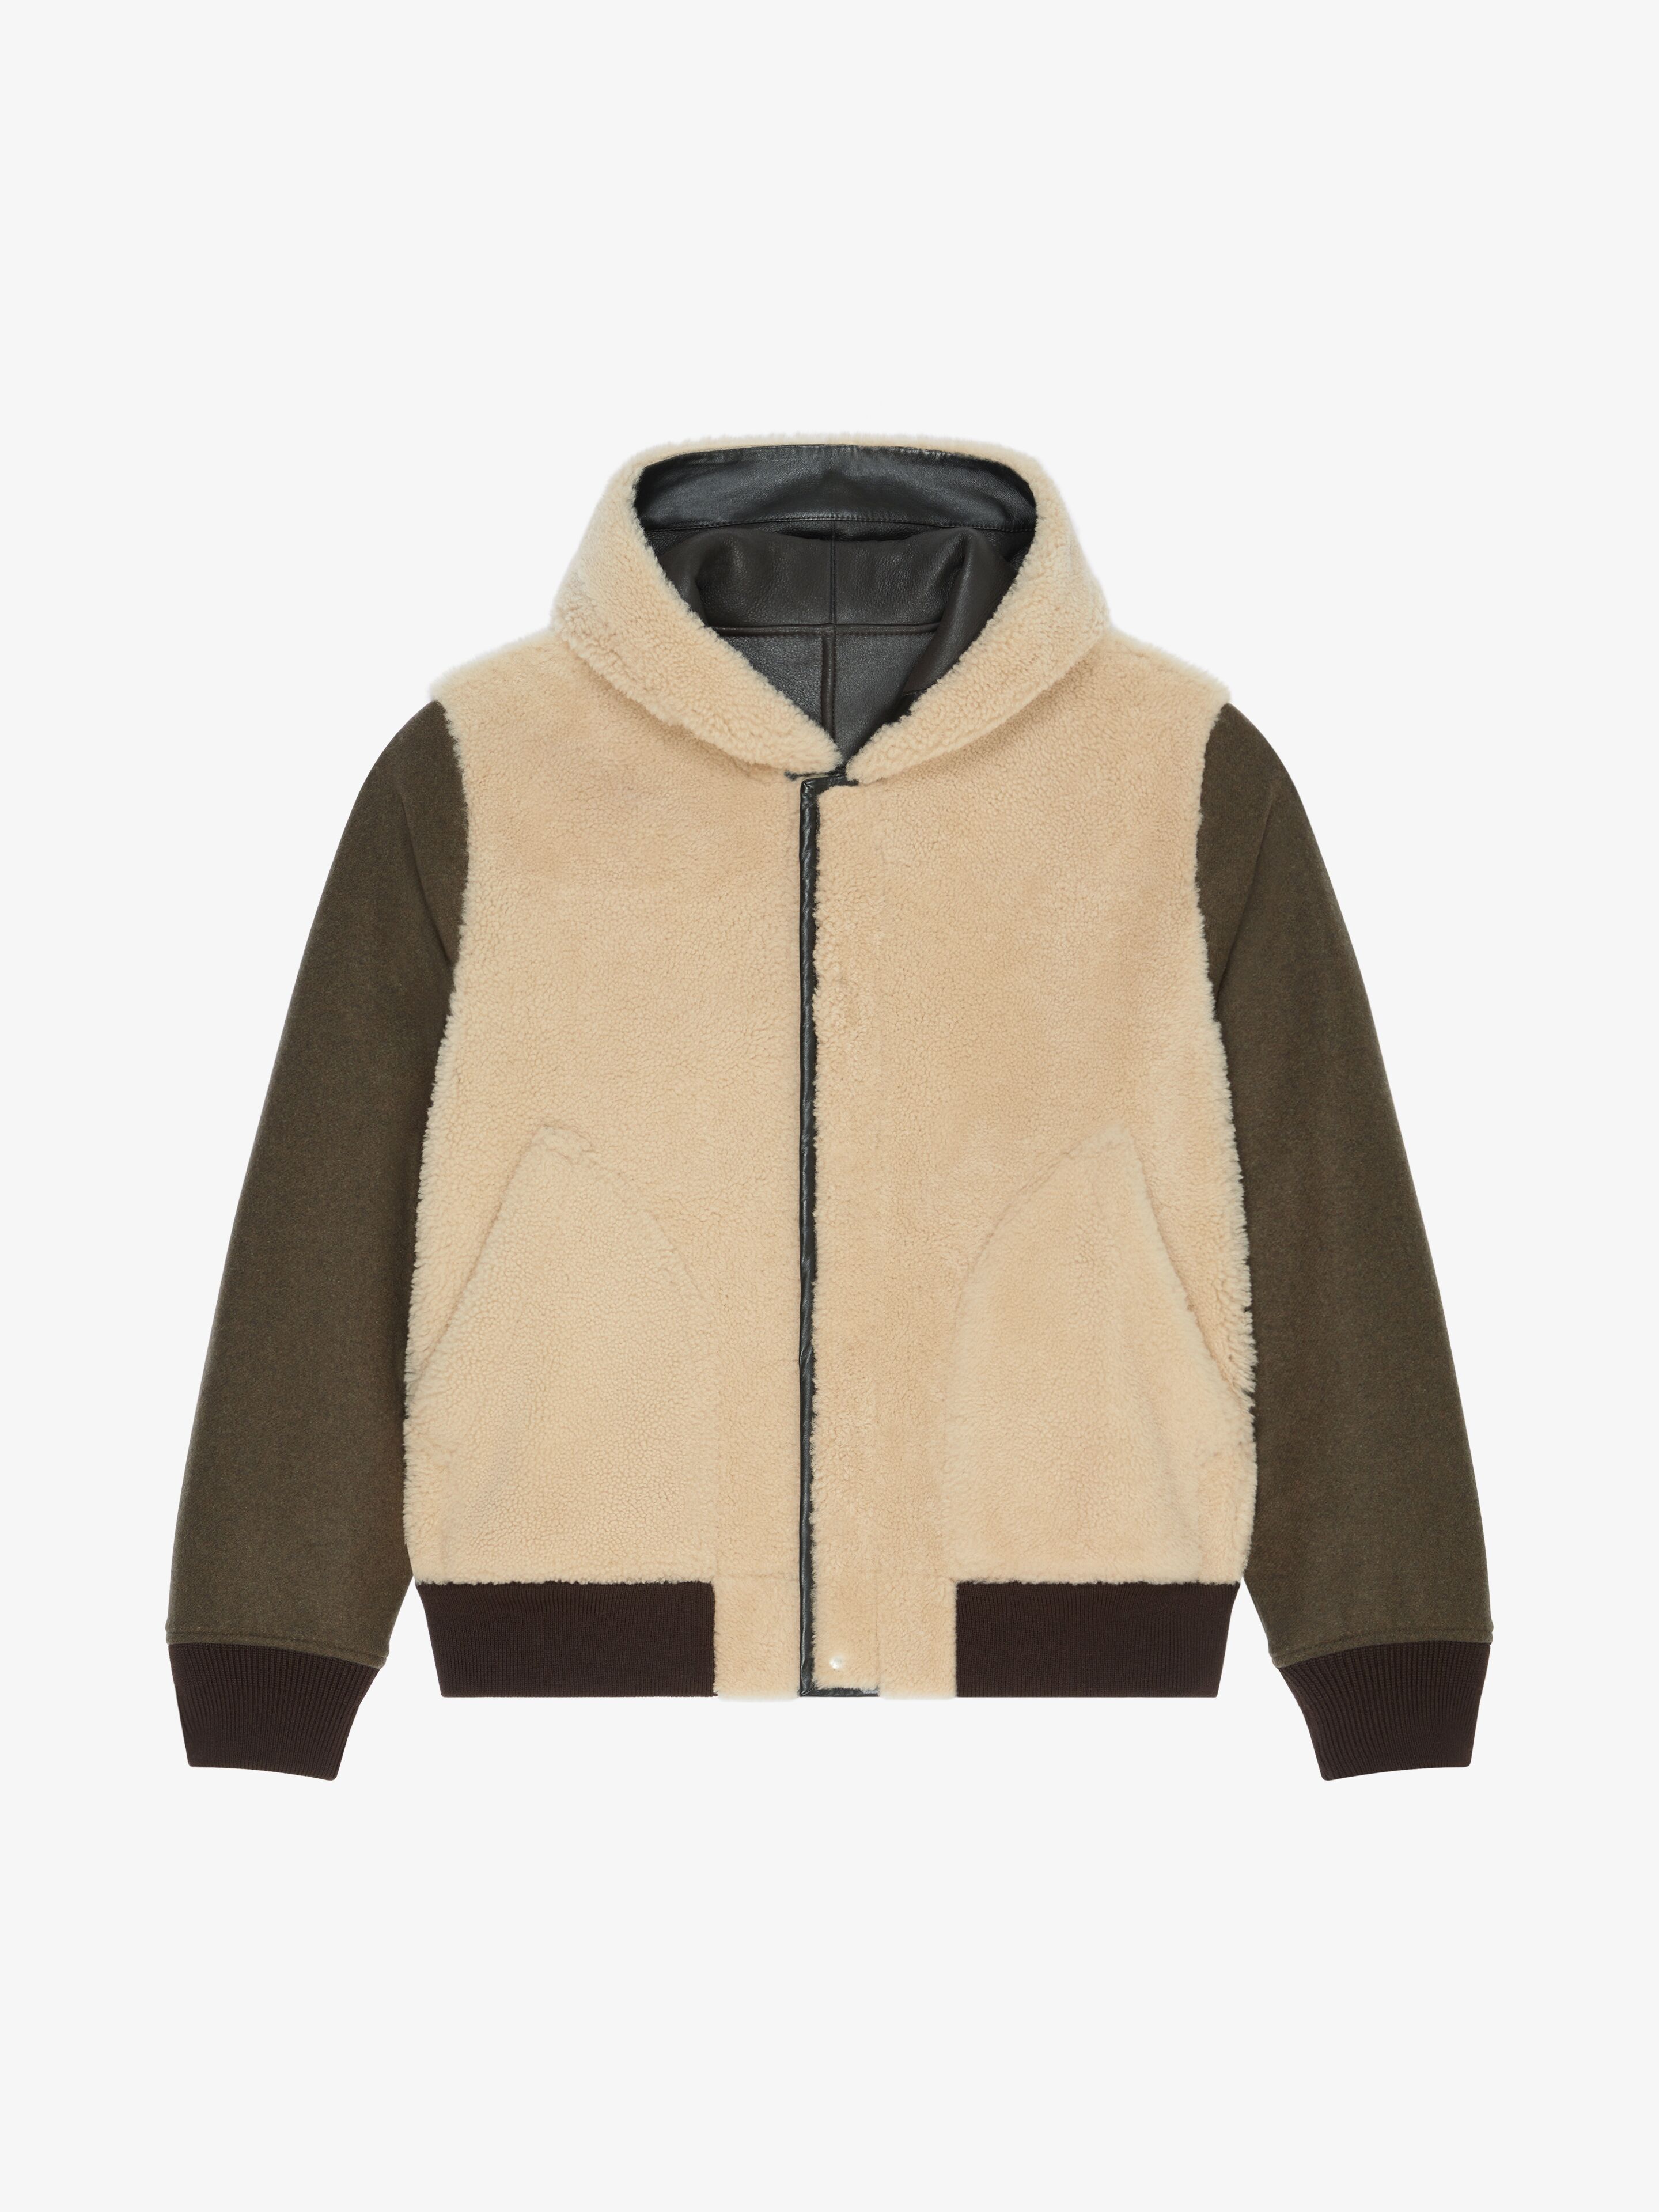 Shop Givenchy Reversible Varsity Jacket In Leather And Shearling In Brown/beige